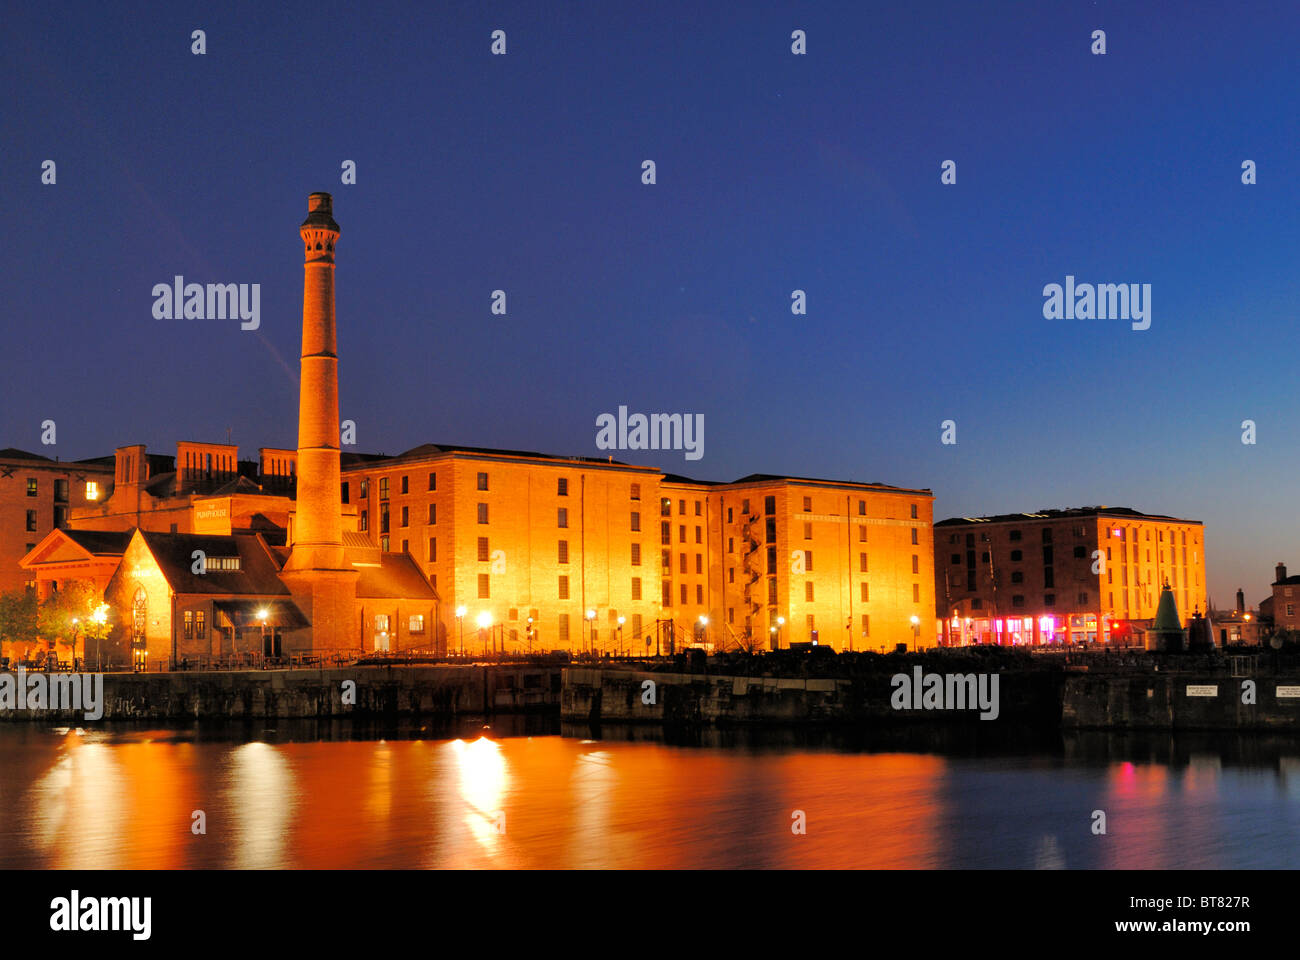 The buildings of the redeveloped Albert Dock complex in Liverpool as seen across Canning Dock. Stock Photo